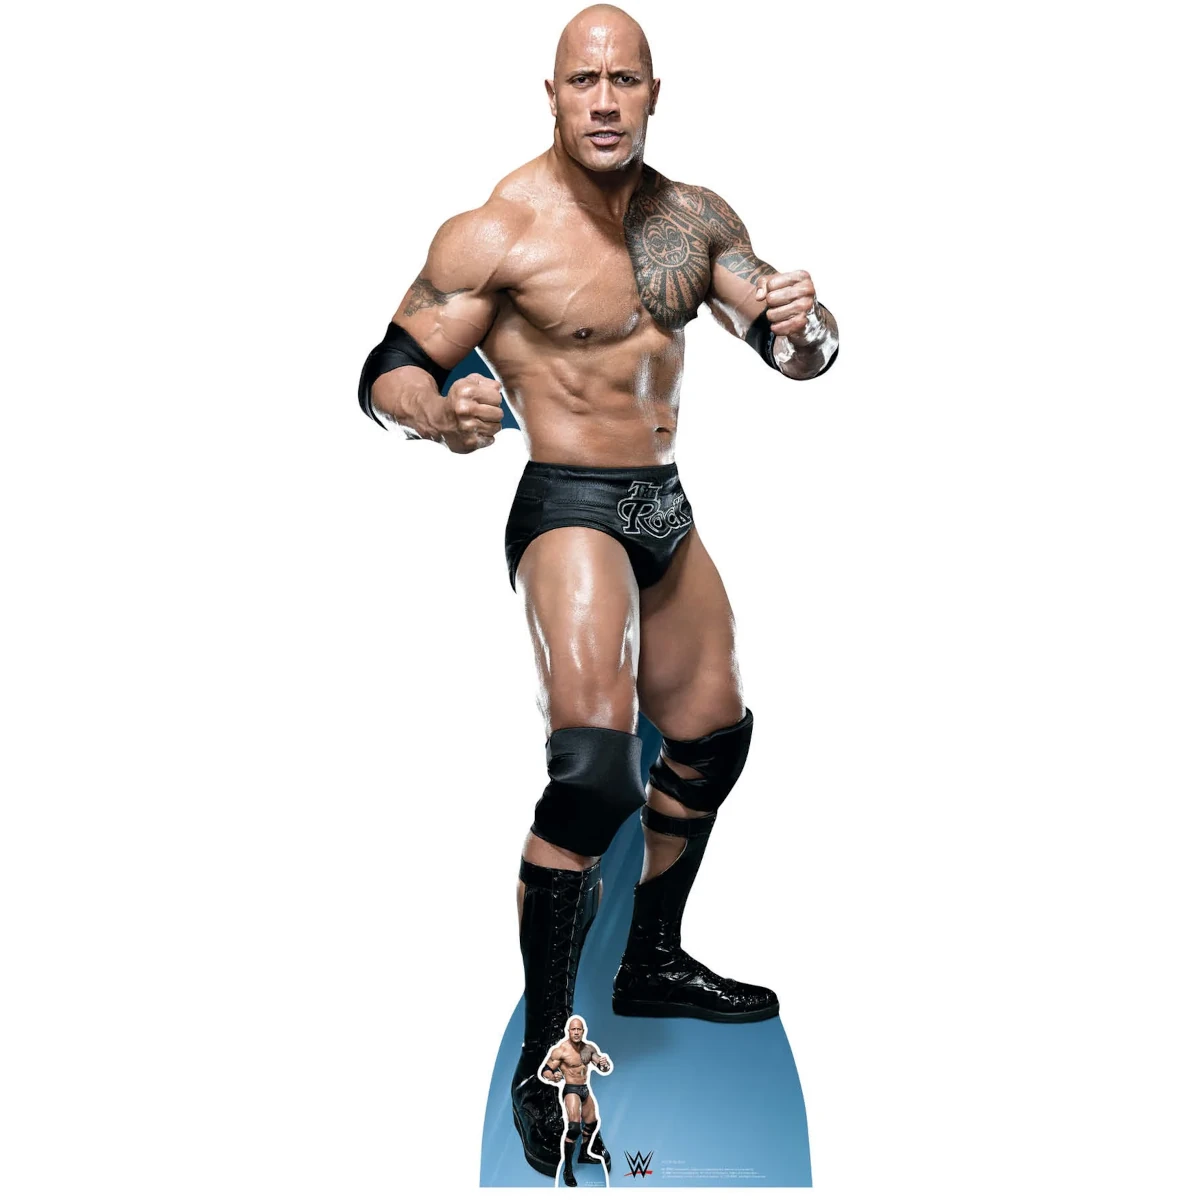 SC1239 The Rock 'Just Bring It' (WWE) Official Lifesize + Mini Cardboard Cutout Standee Front